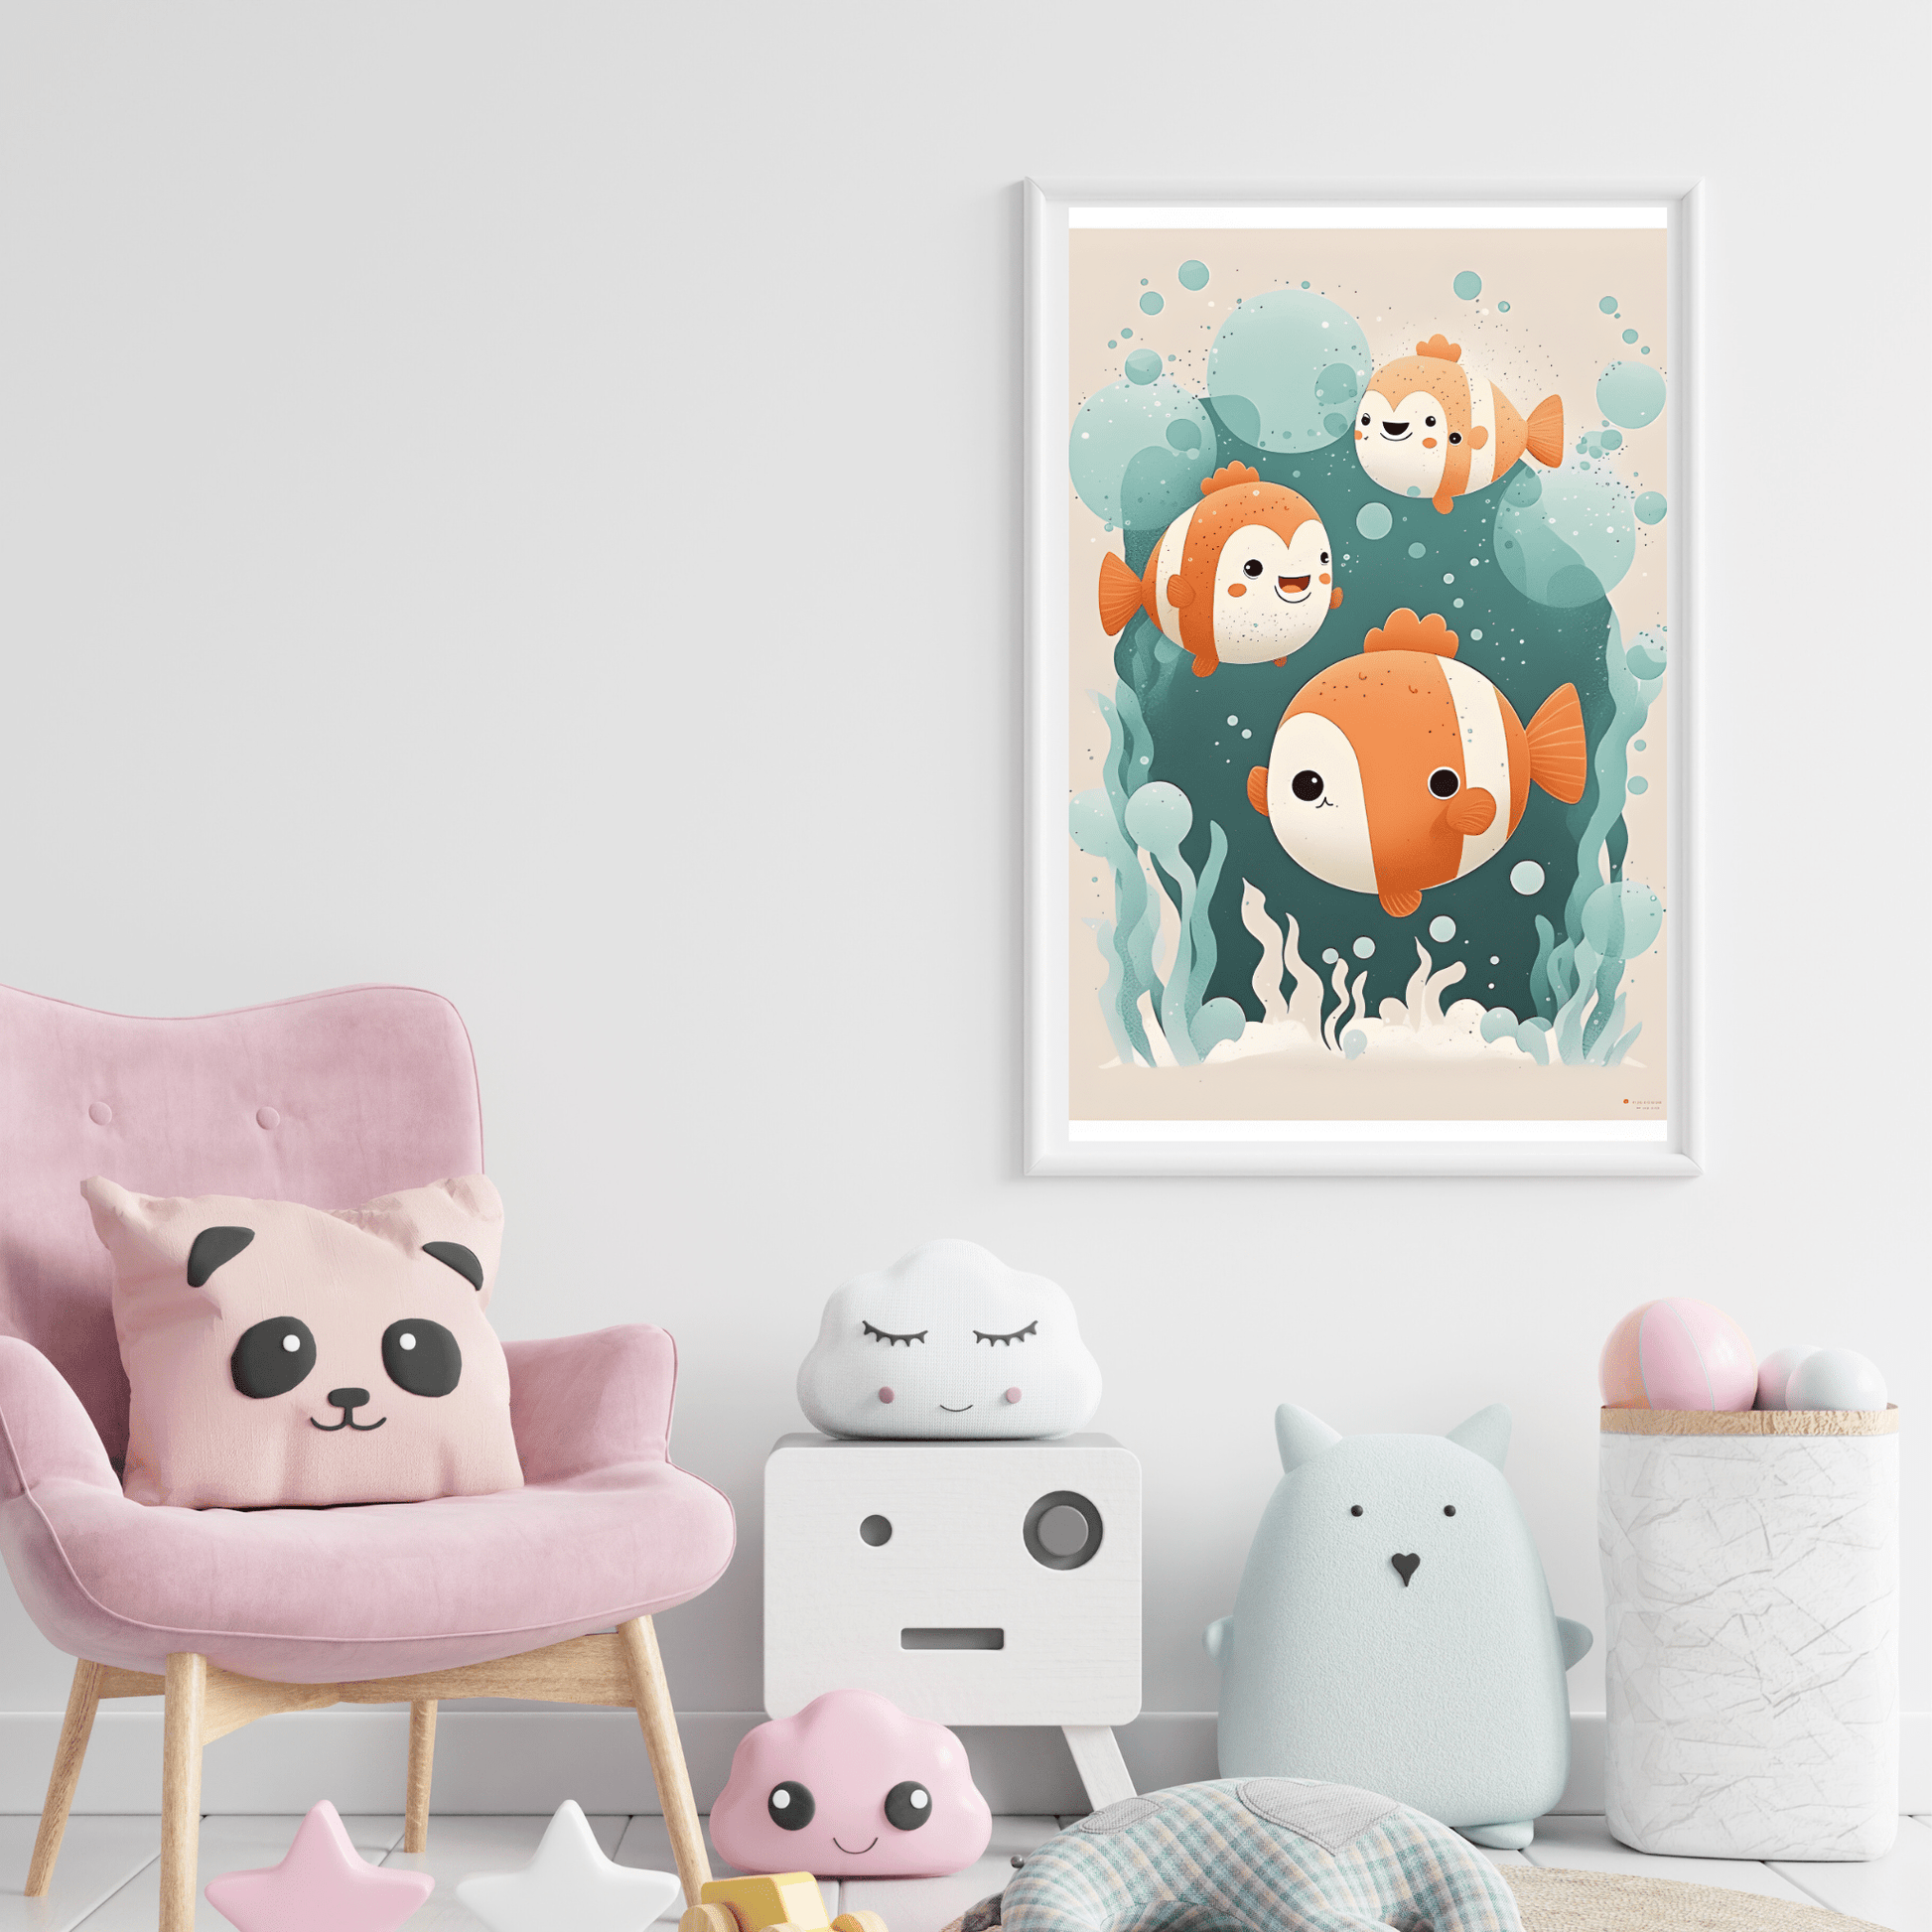 framed poster of clown fish in a kids room